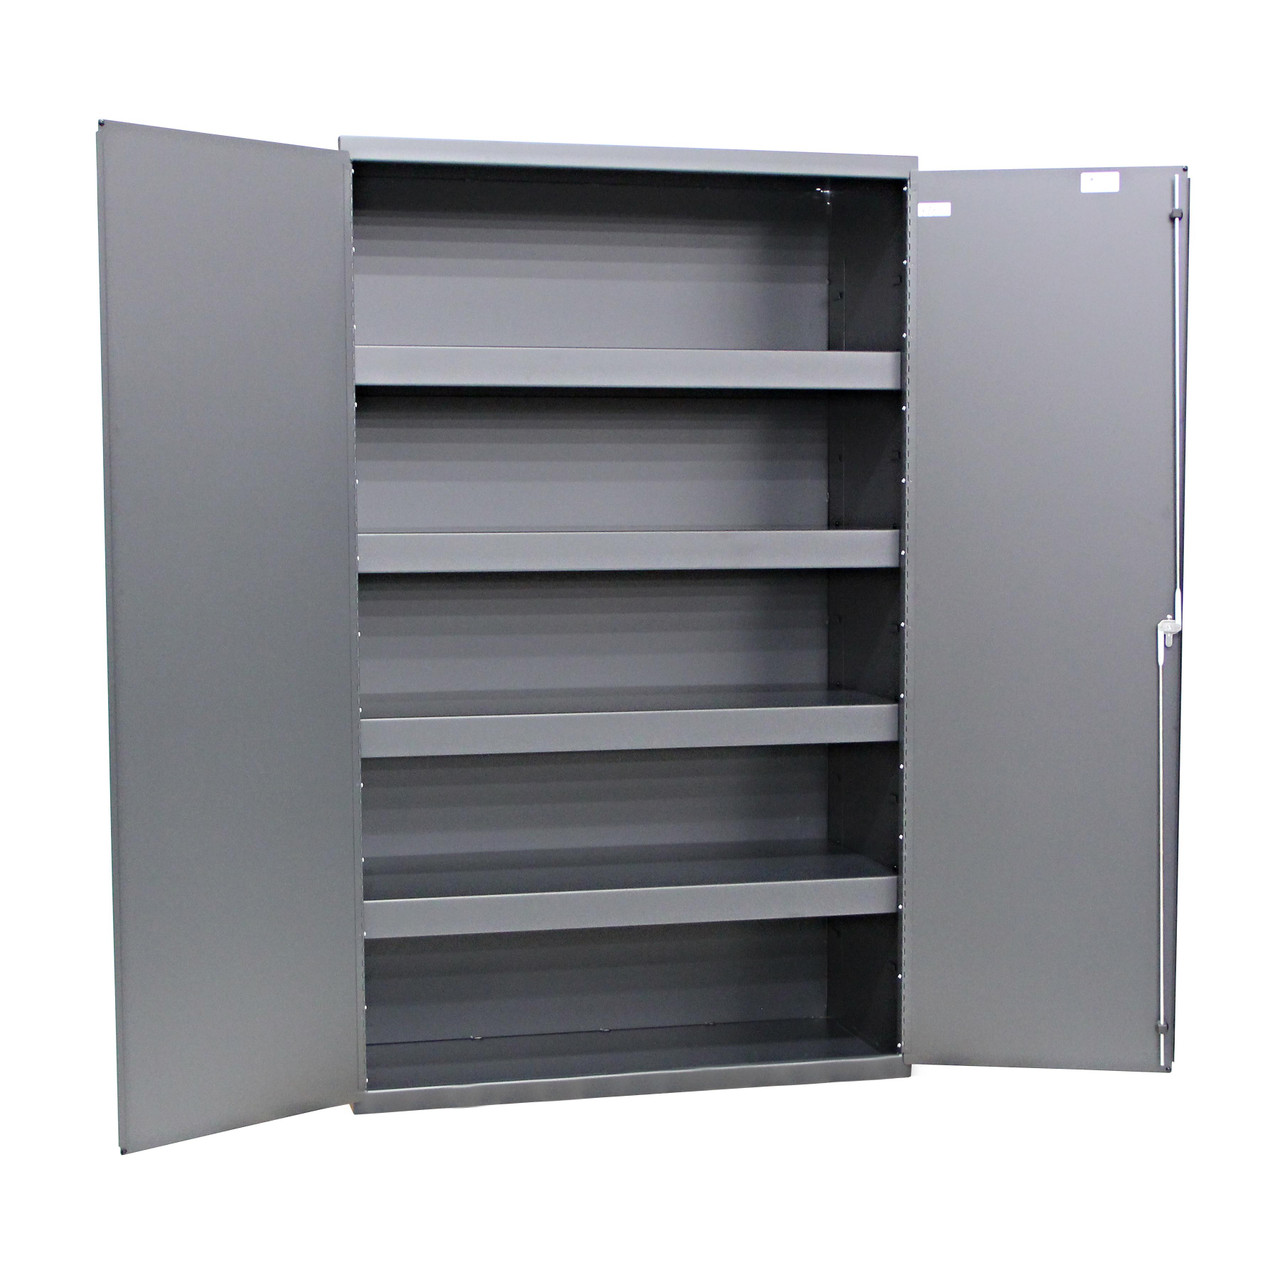 Valley Craft Heavy Duty Steel Cabinet 36 x 18 x 72", Smoke Gray(CALL FOR BEST PRICING)